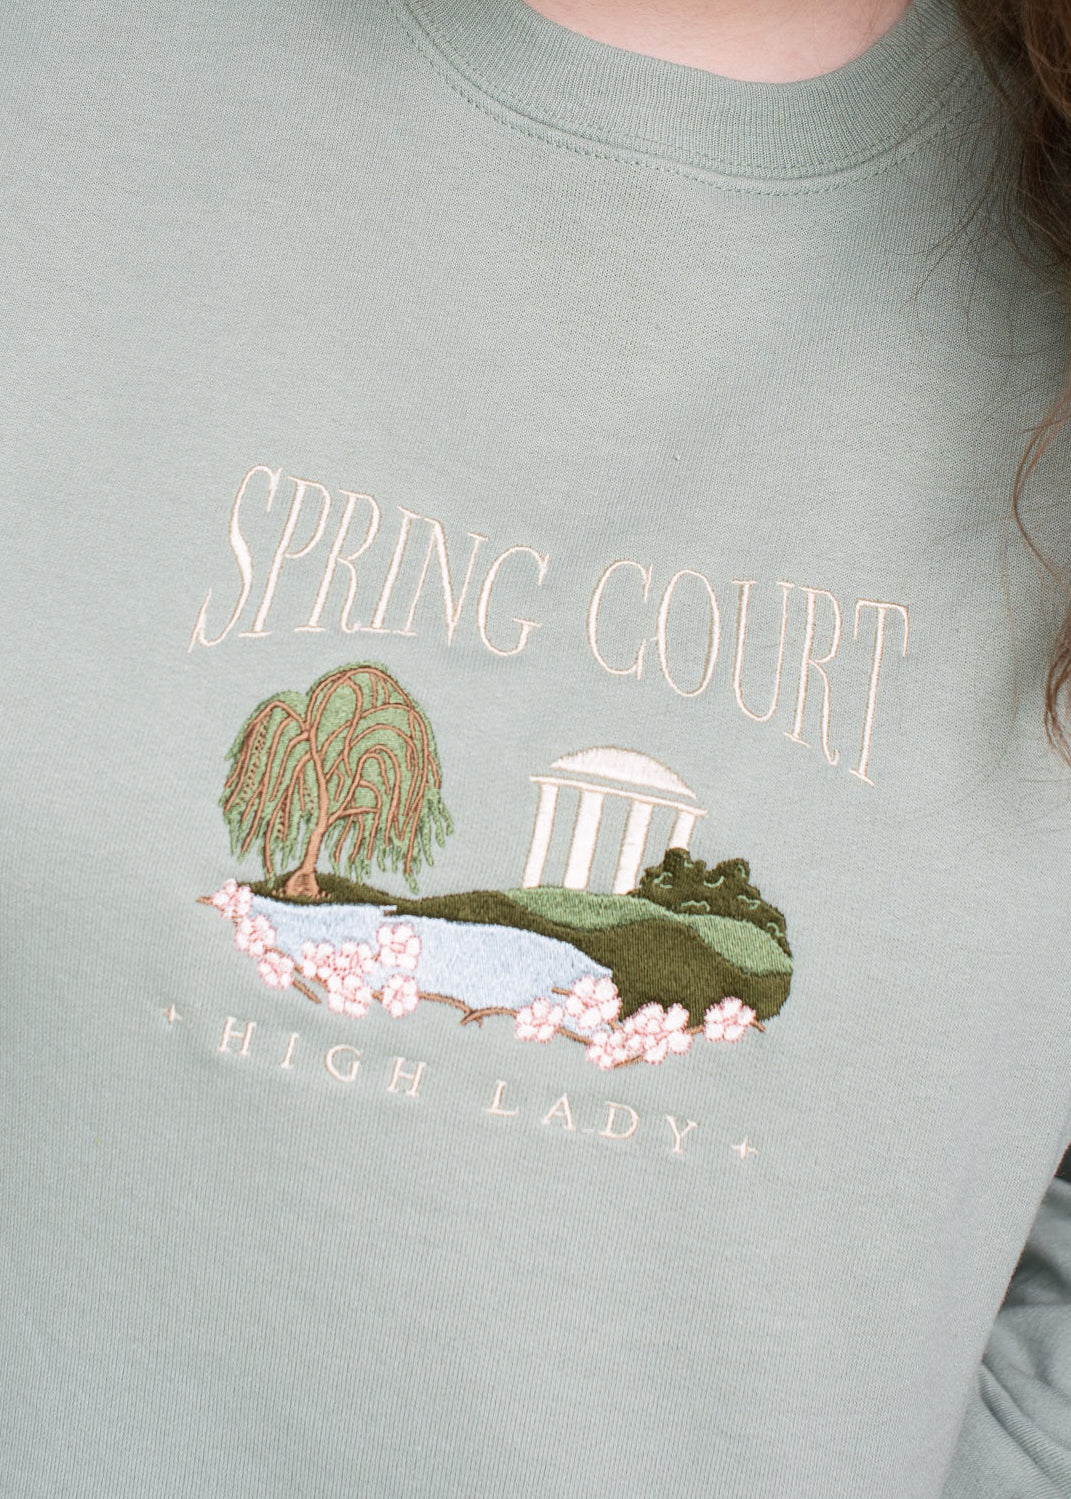 High Lady of the Spring Court Crewneck